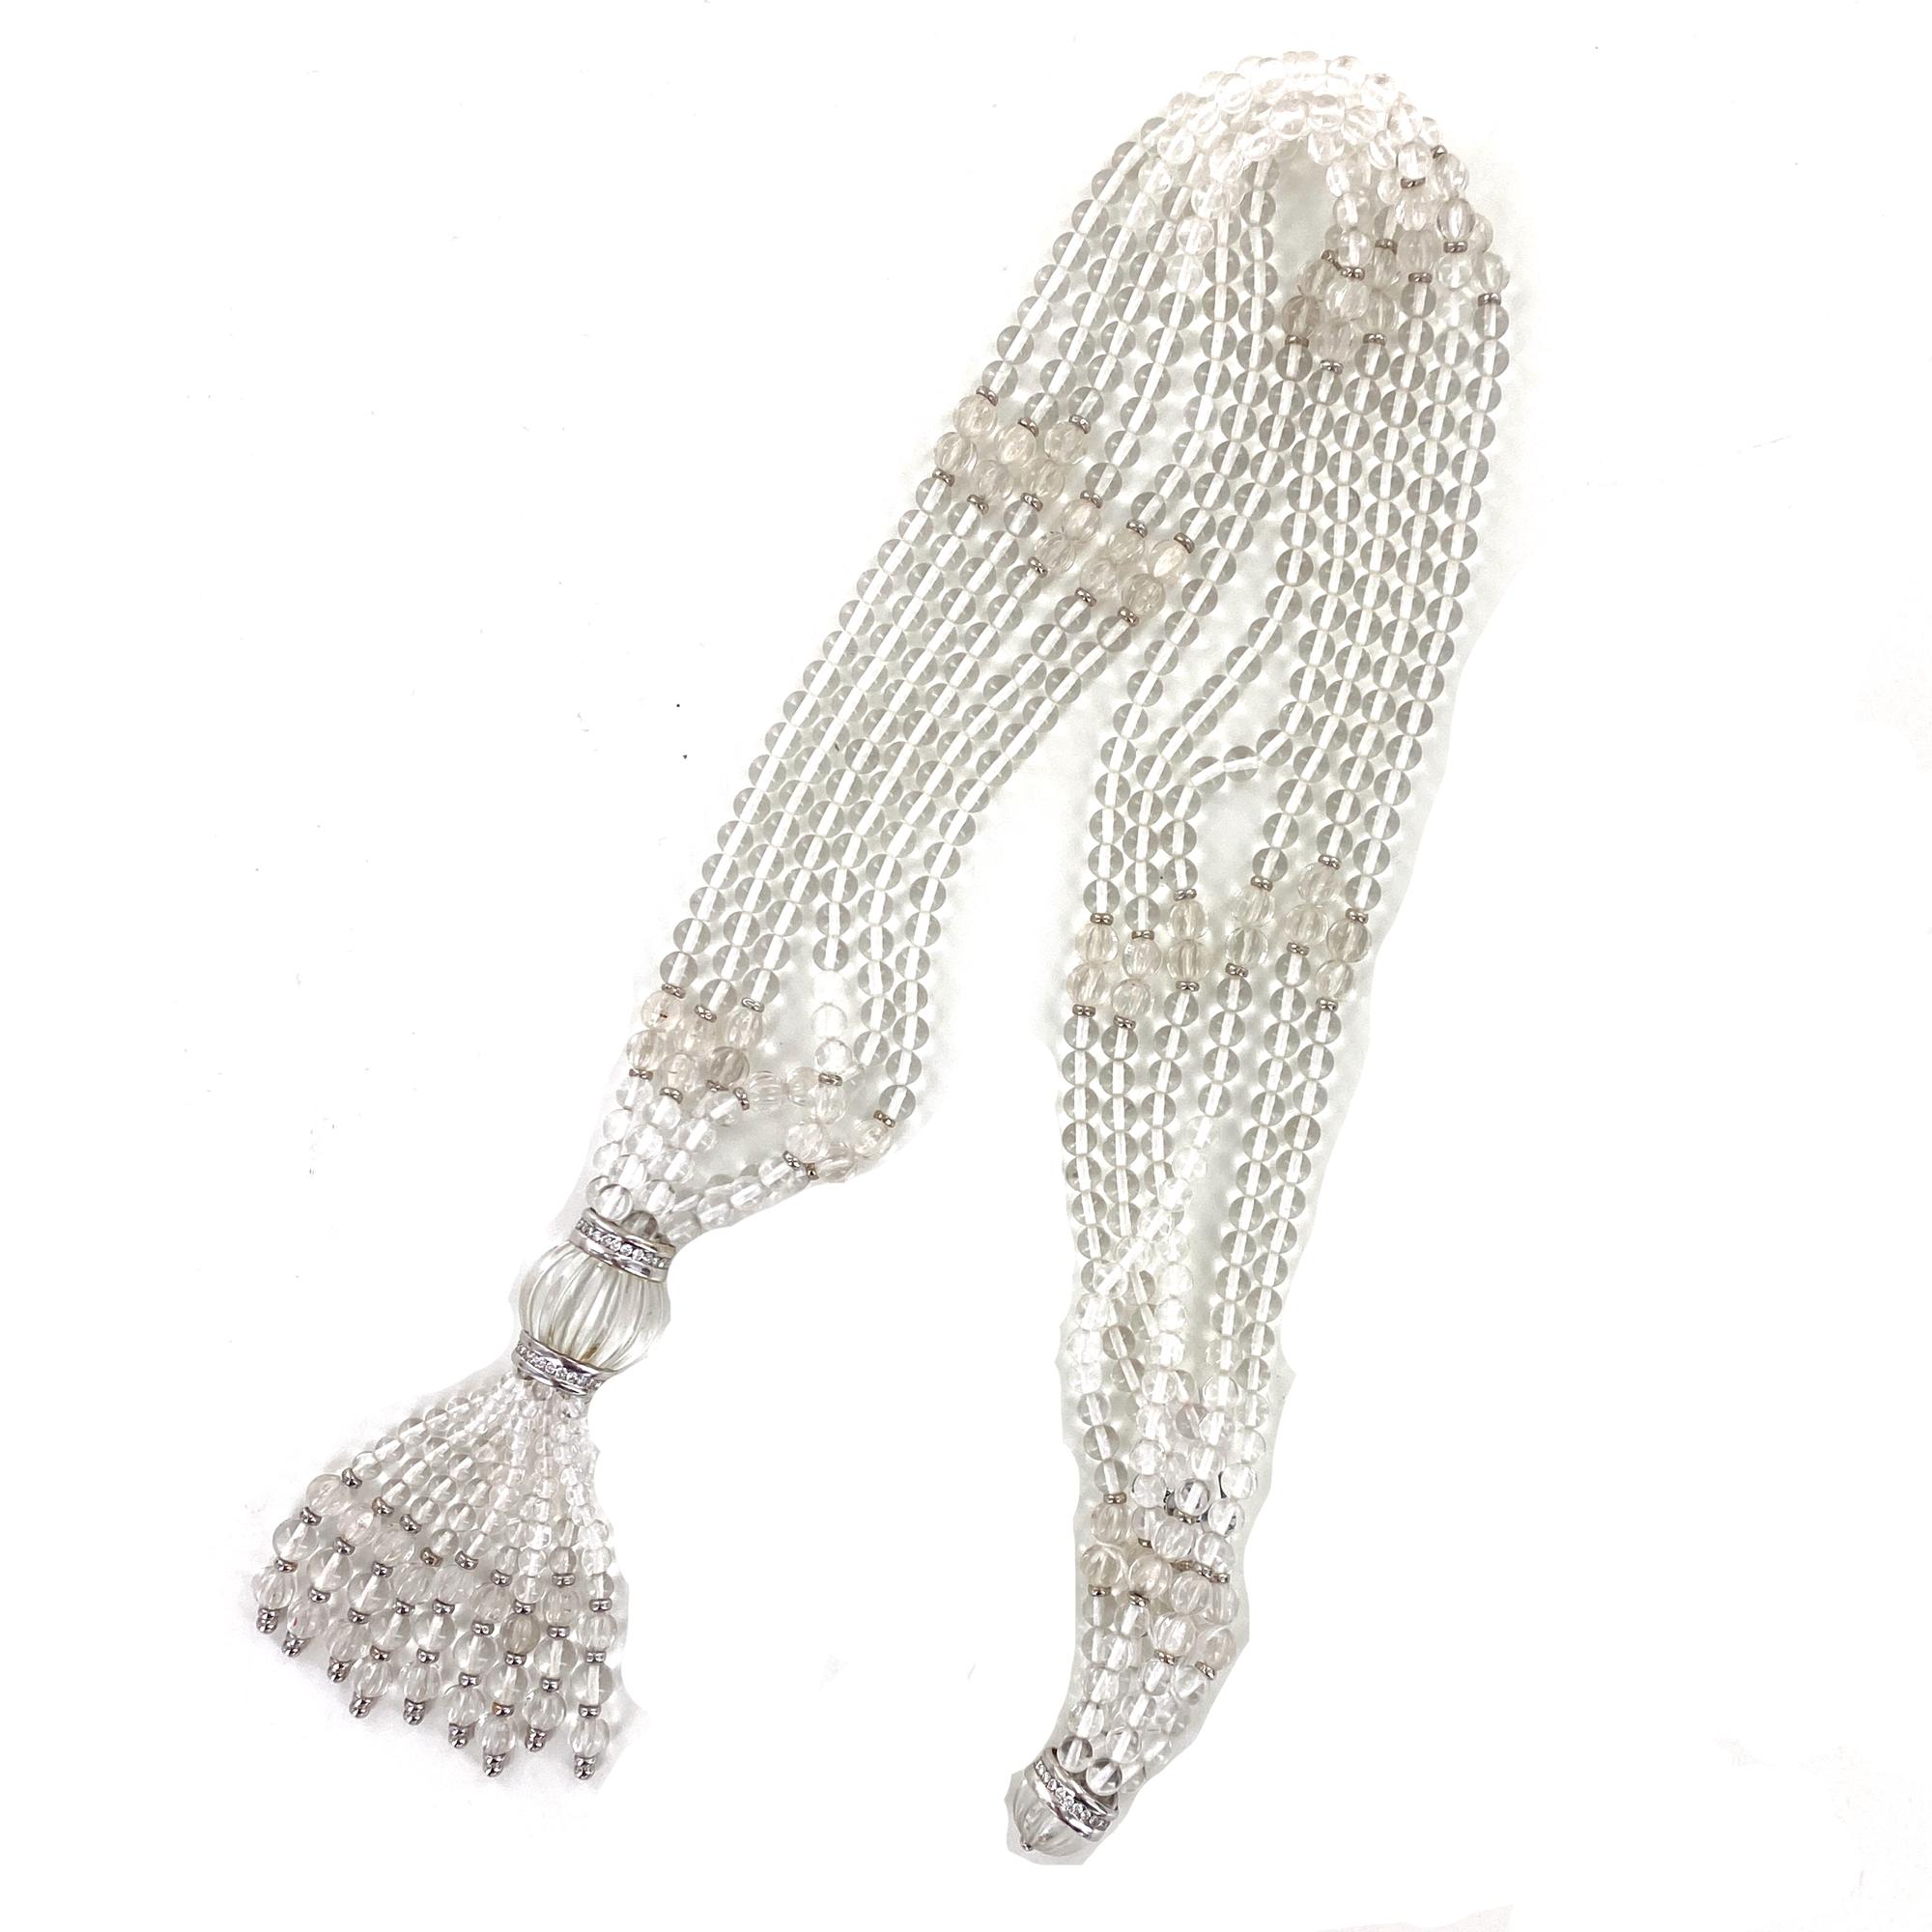 Fabulous crystal bead and diamond necklace by Trianon. The versatile multi strand necklace can be worn many different ways (see photos). The necklace measures 18 inches in length and the tassel segment measures 3.0 inches in length. Round brilliant